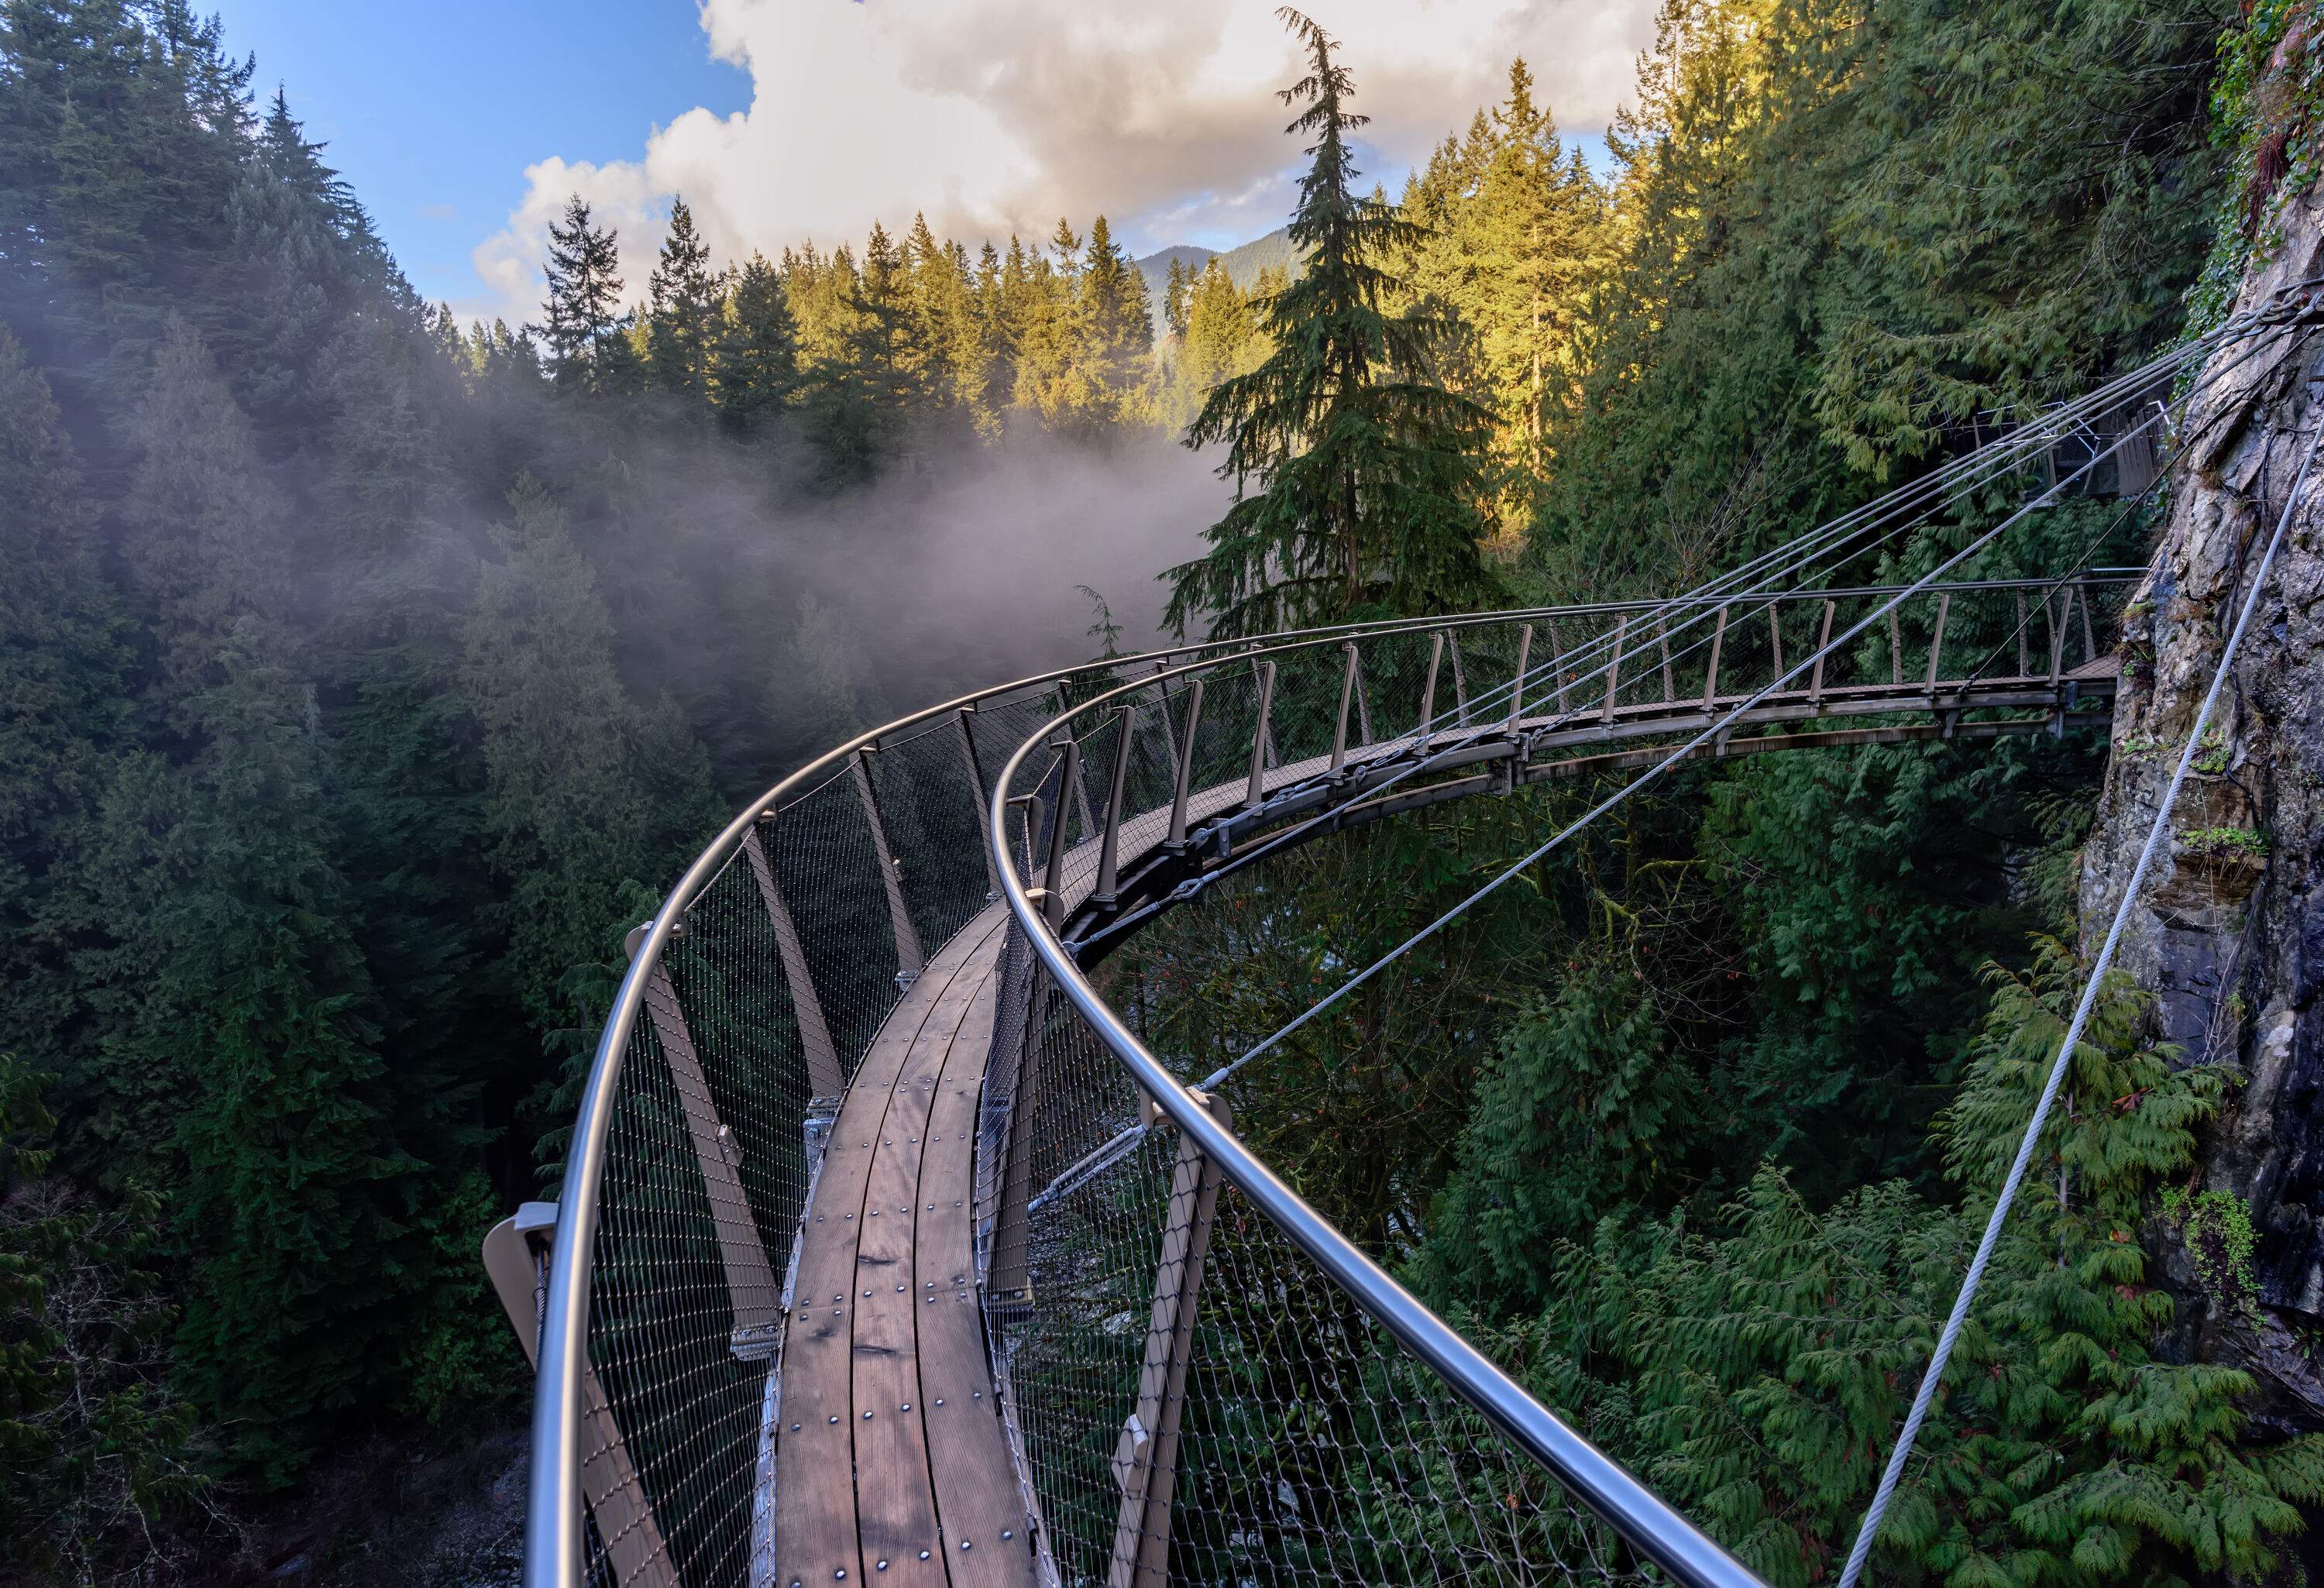 A gracefully curved suspension bridge spans the turbulent streams of a mountain river, surrounded by verdant forests, ethereal white fog, and rugged towering mountains.